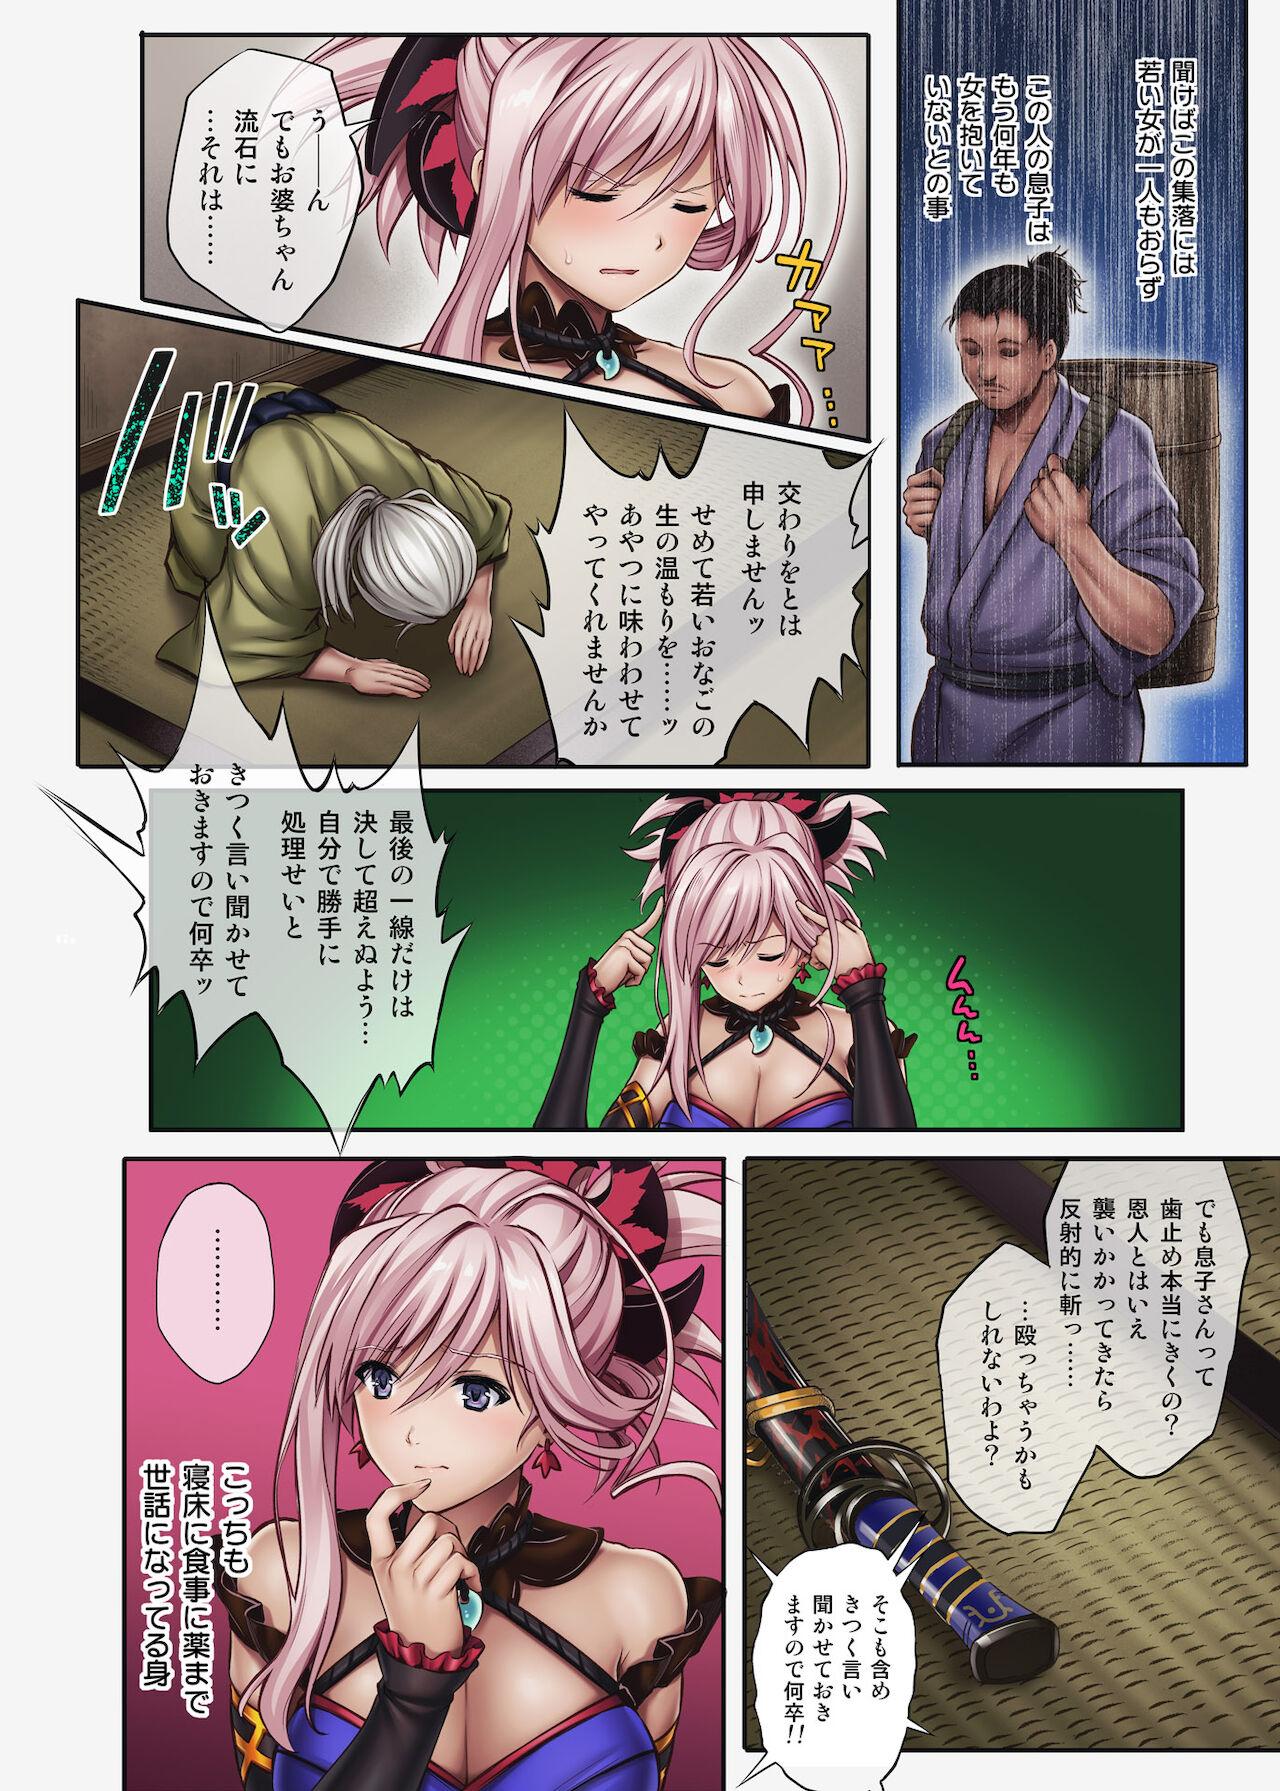 Foot Fetish Cyclone no Doujinshi Full Color Pack 4 - Fate grand order Buttfucking - Page 9